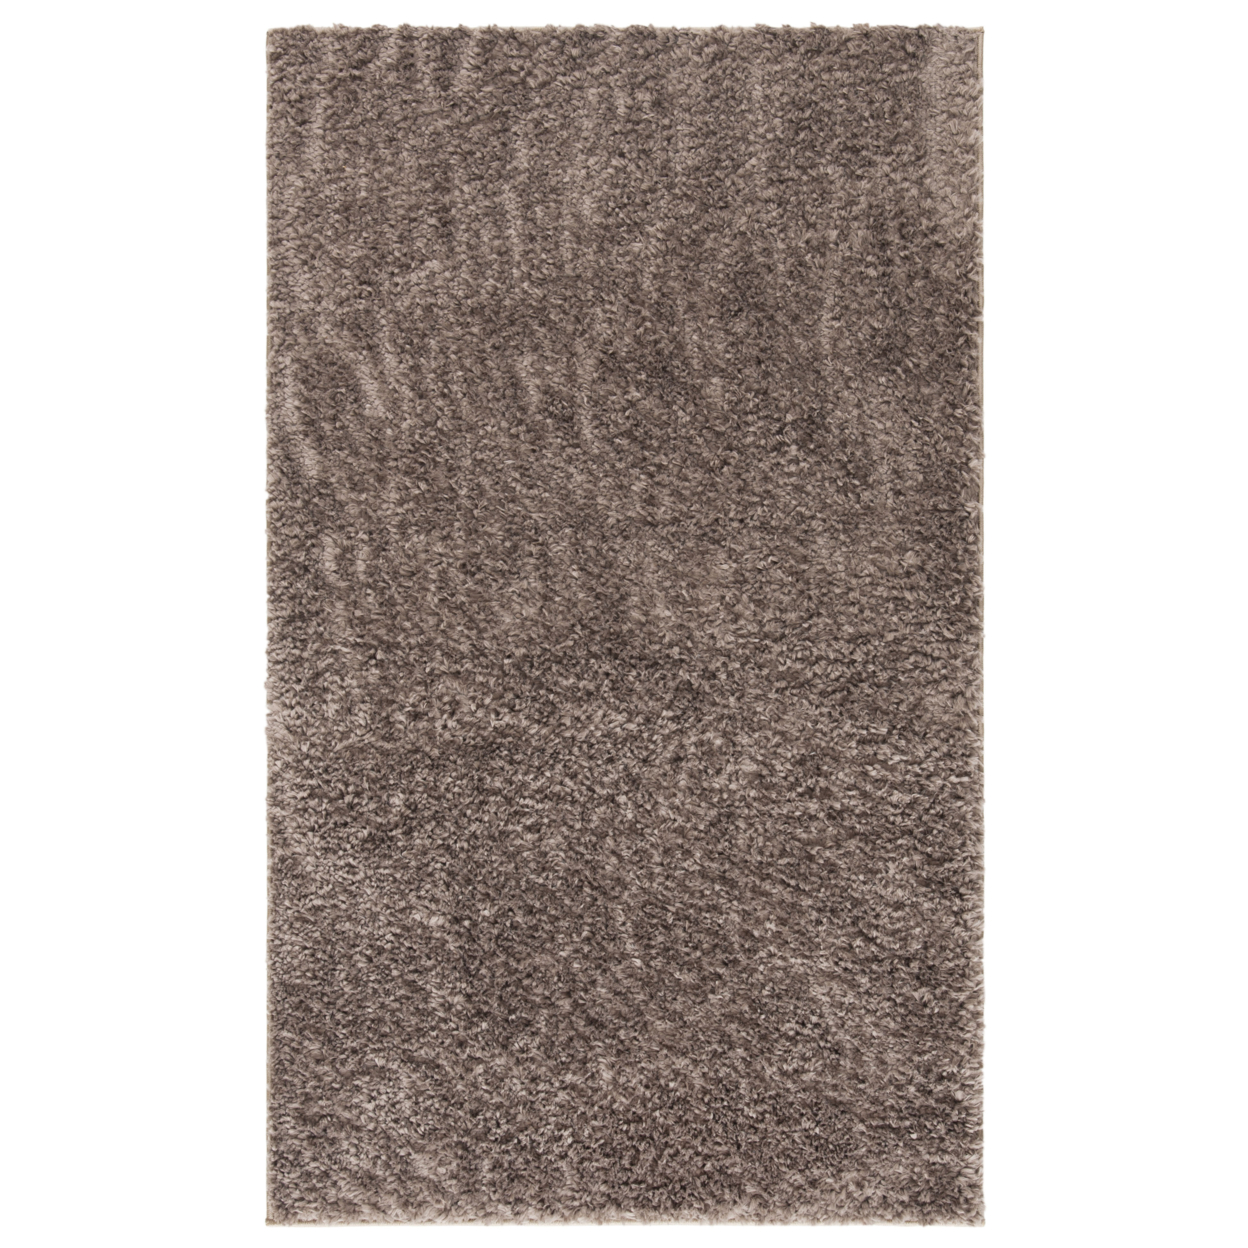 SAFAVIEH August Shag Collection AUG900R Taupe Rug - 8' 6 Round